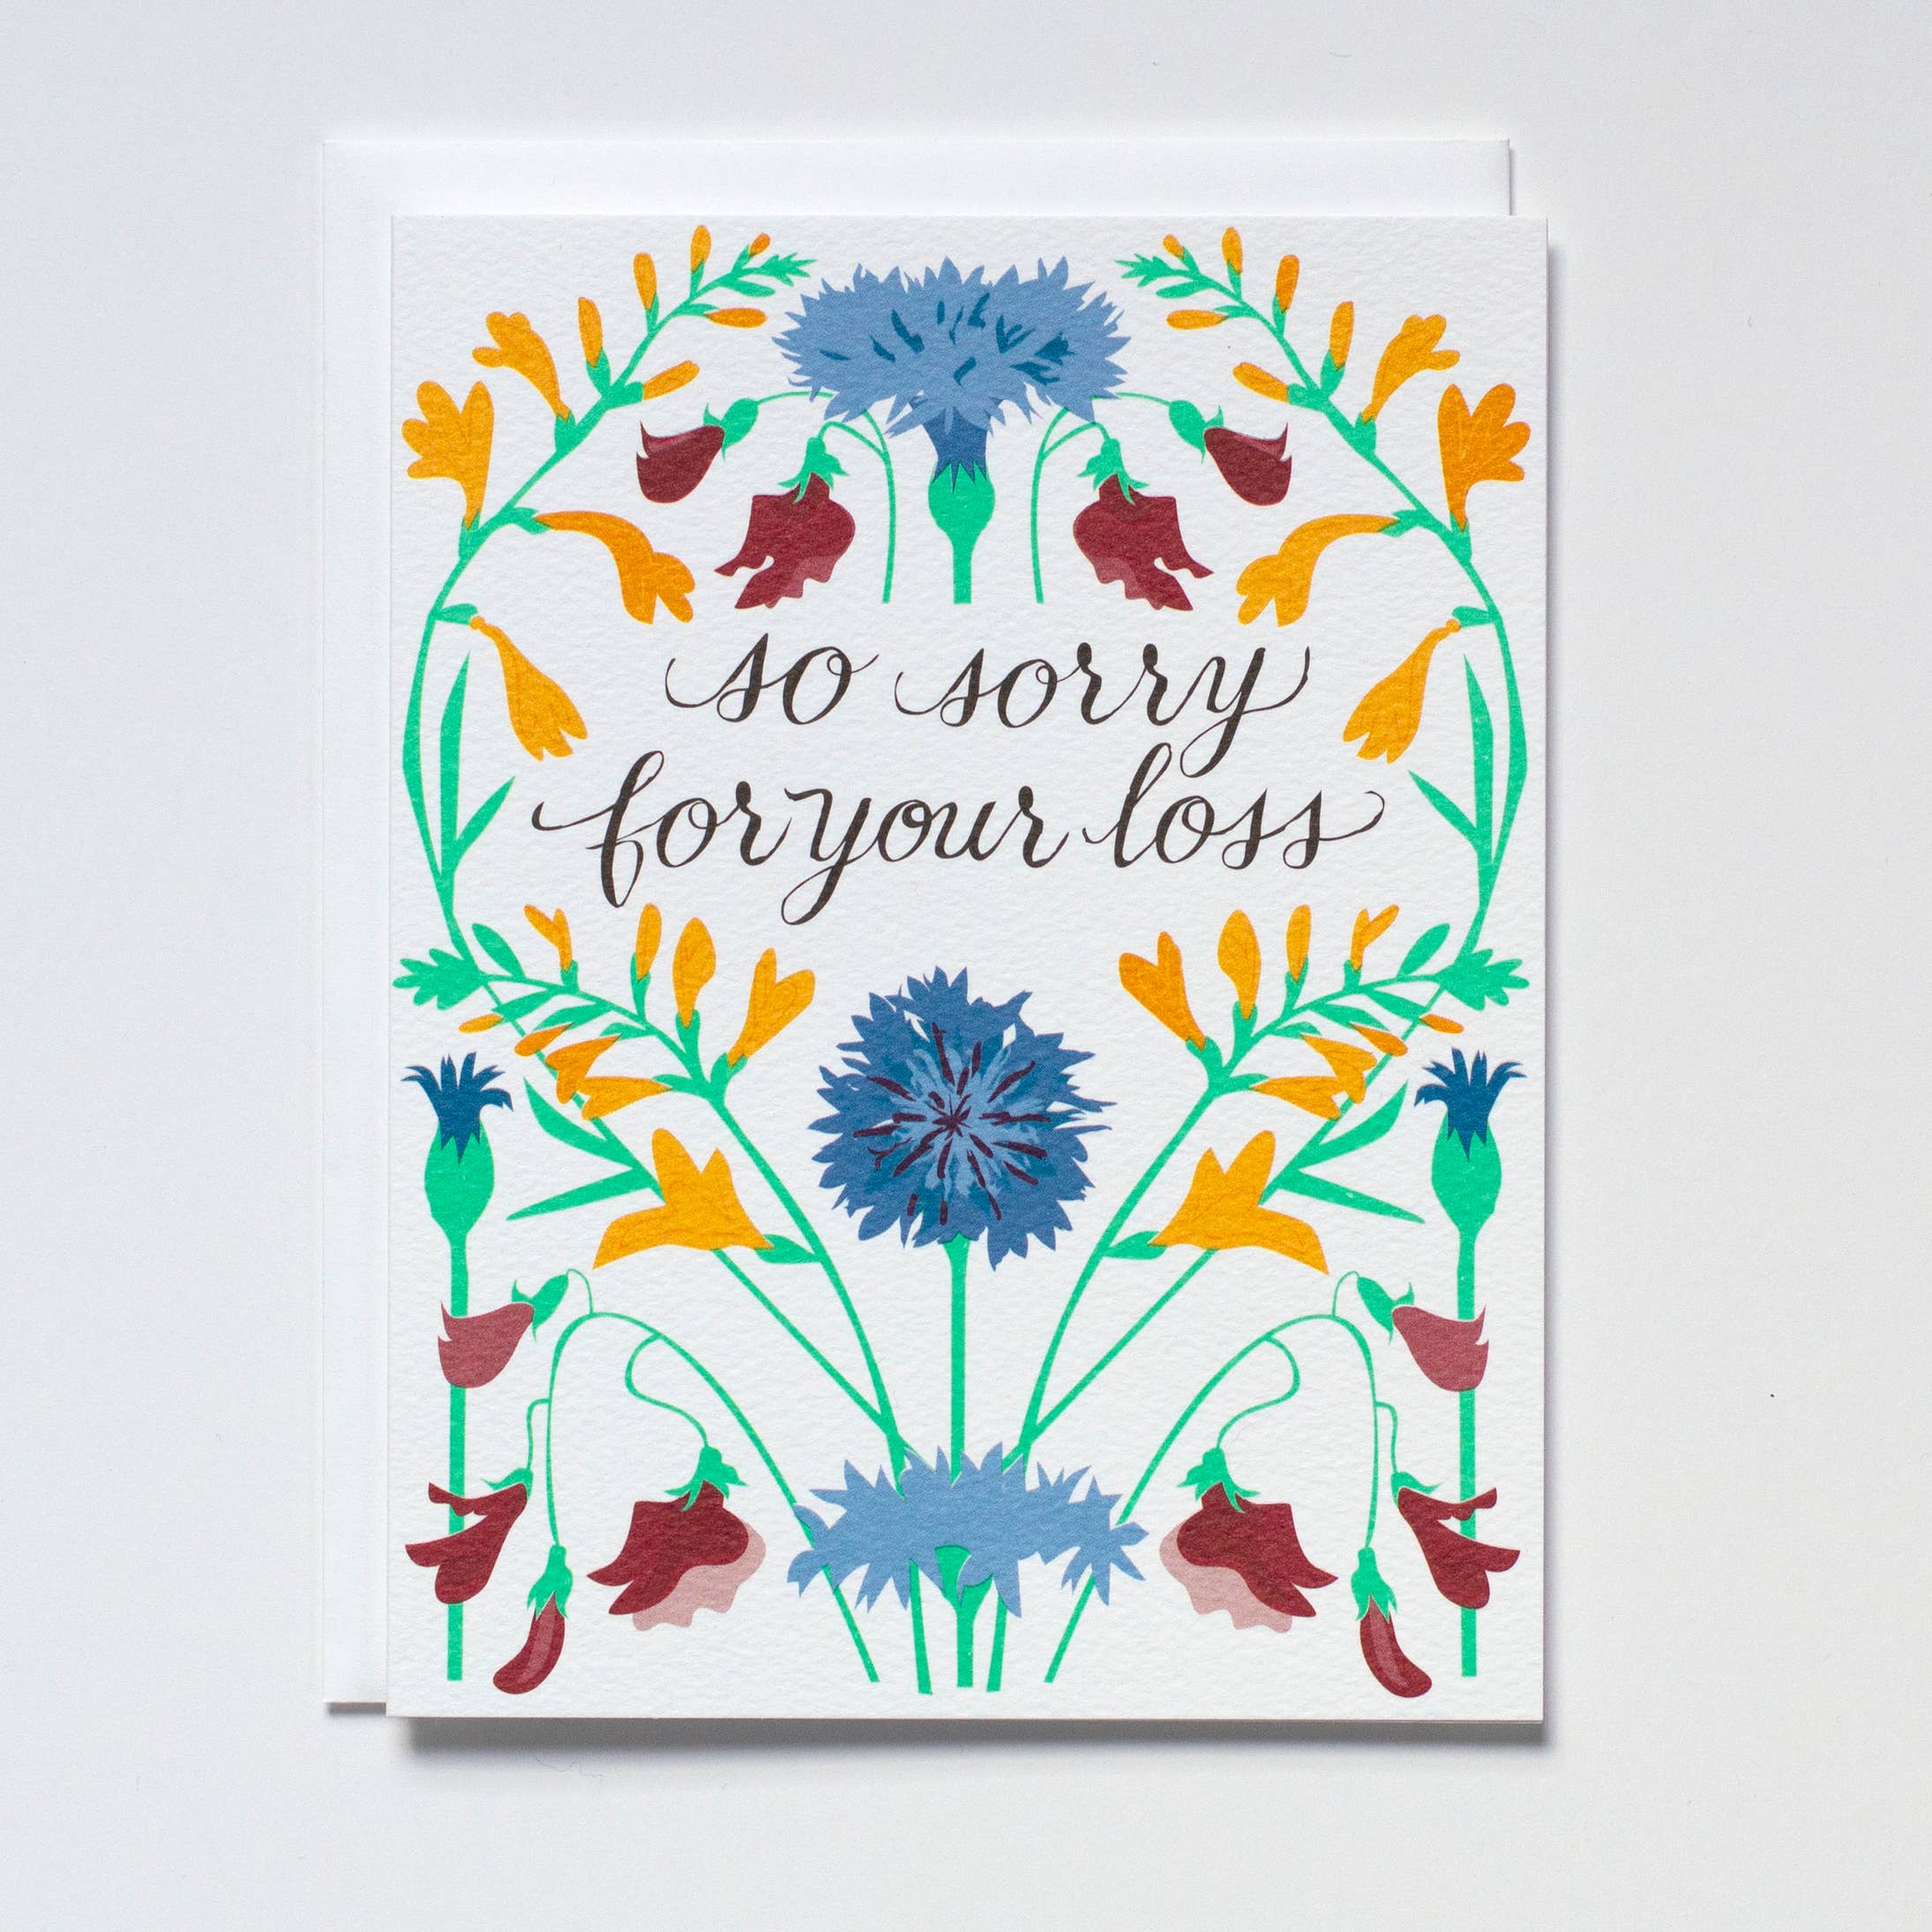 Banquet Workshop - so sorry for your loss card